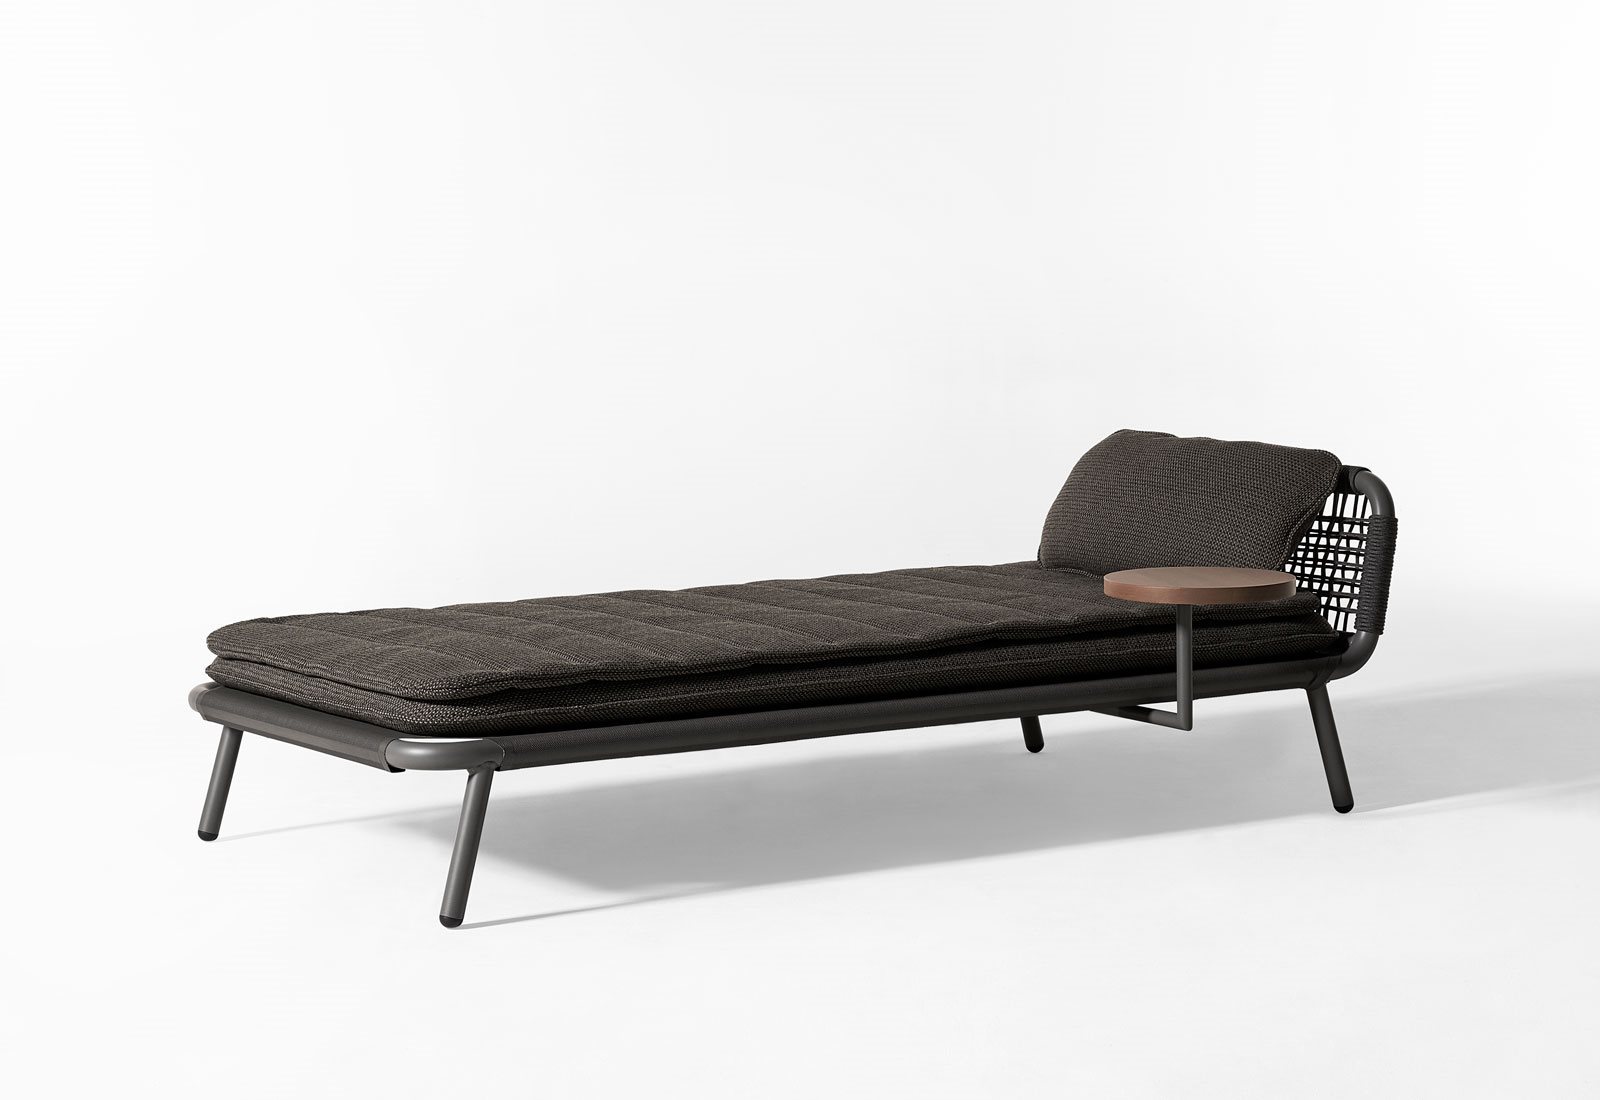 Noa-open-air-lounge-bed-04-1600x1100